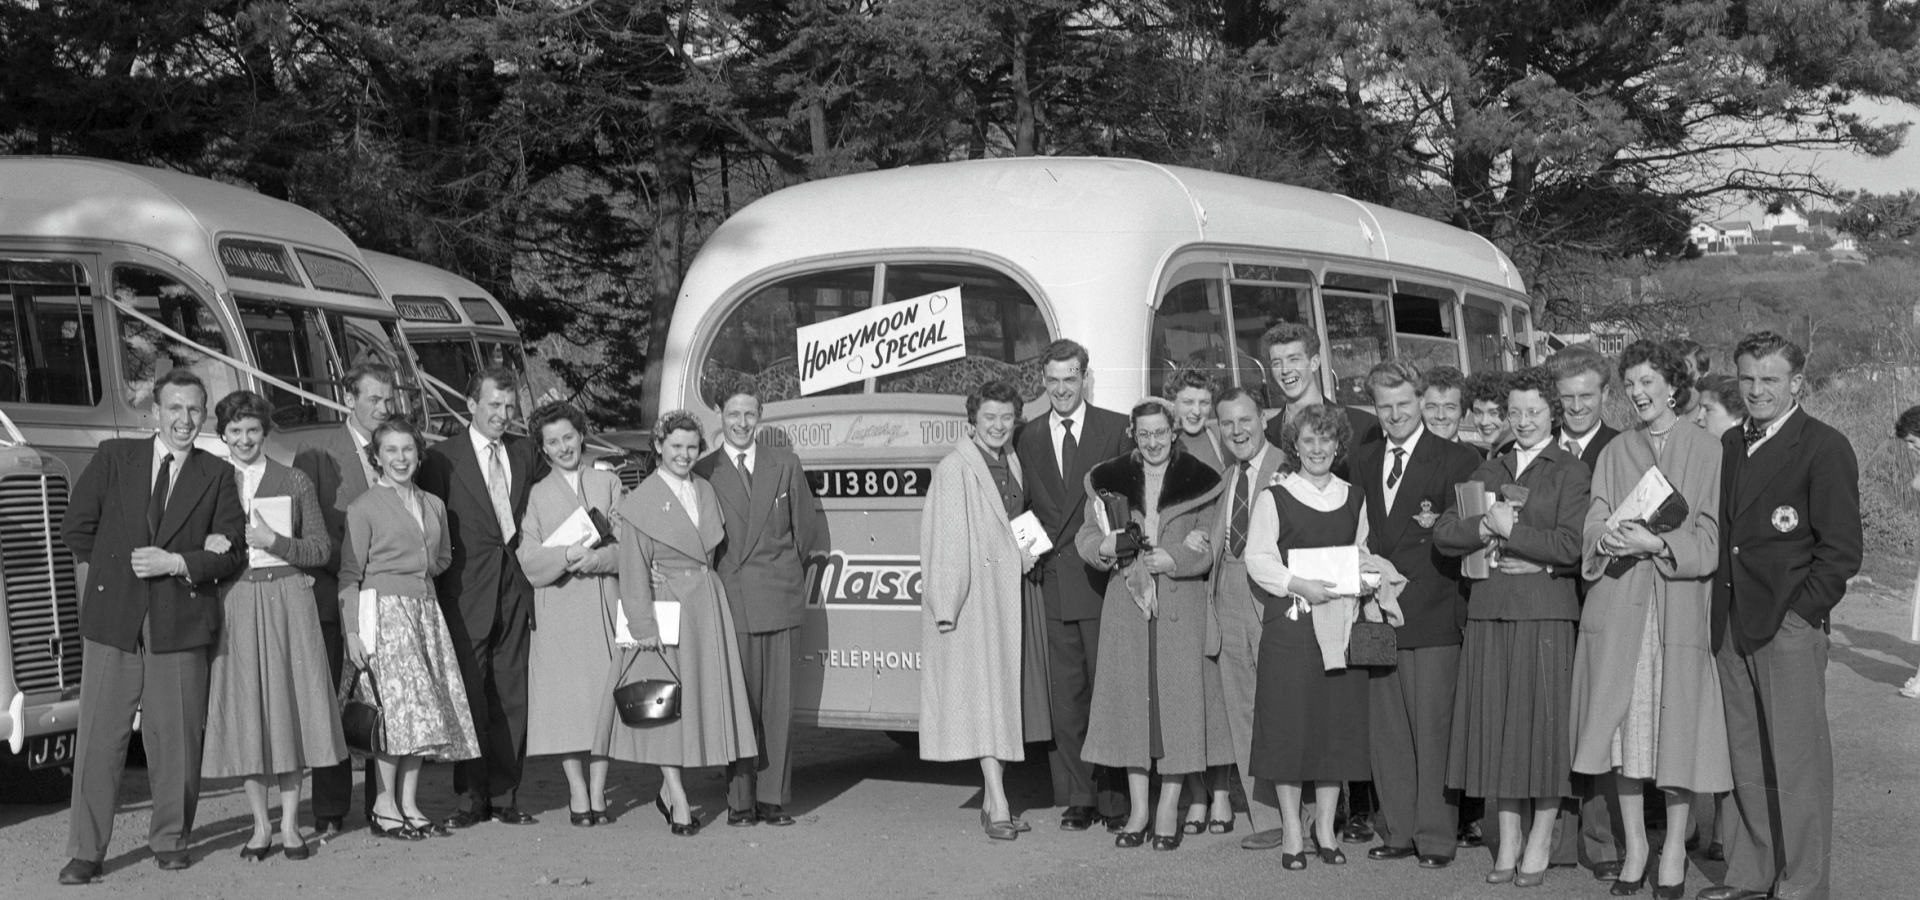 Group of couples standing in front of a vintage bus